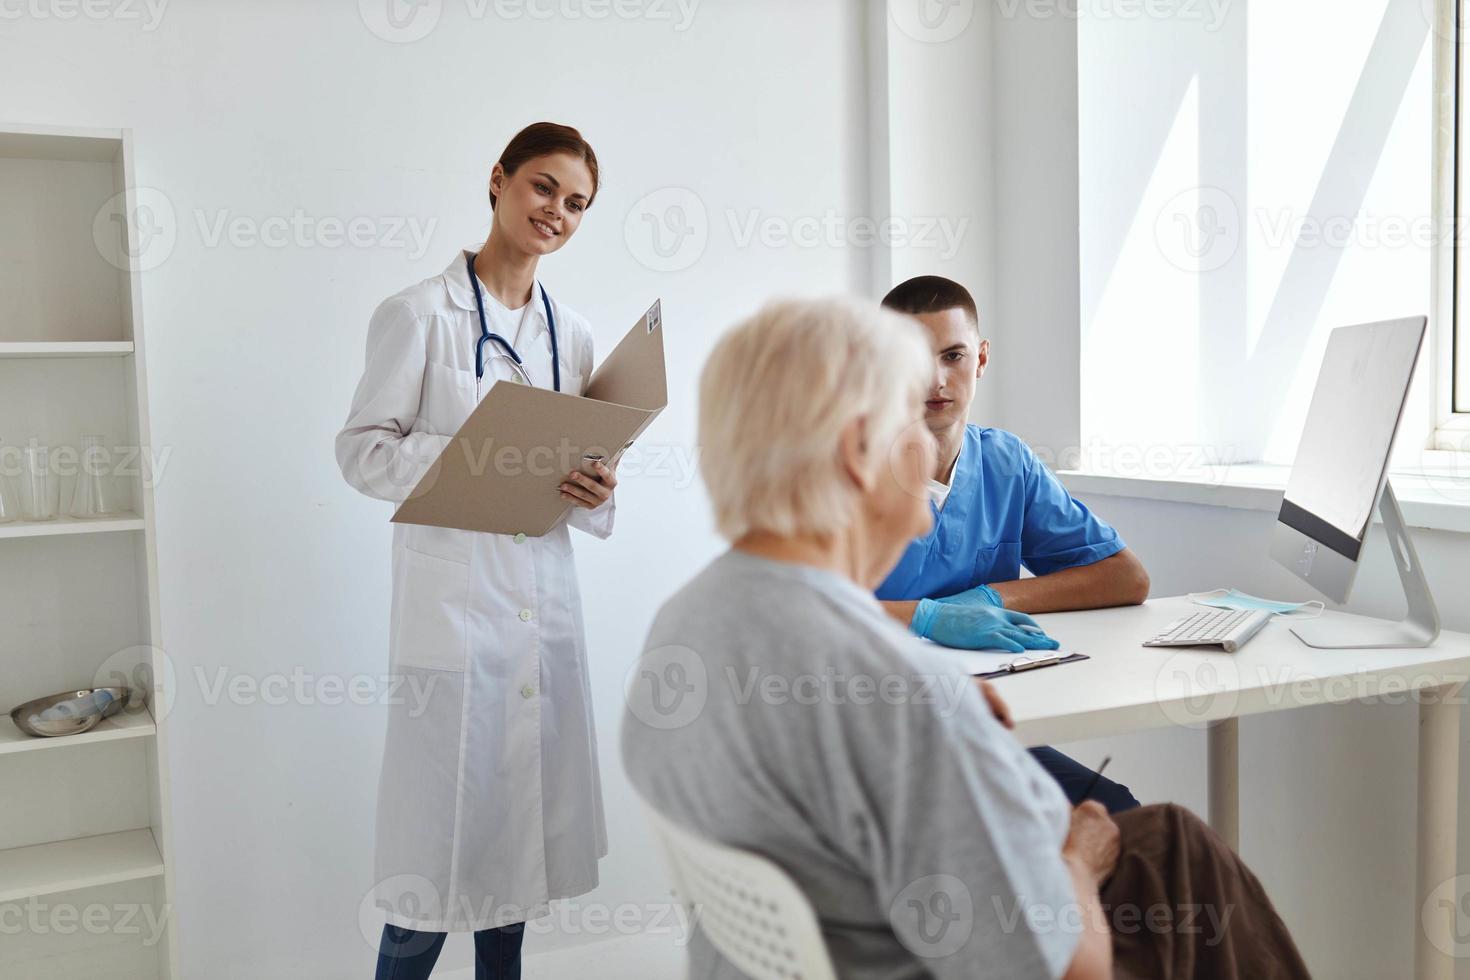 nurse assistant and doctor examining the patient hospital diagnostics photo